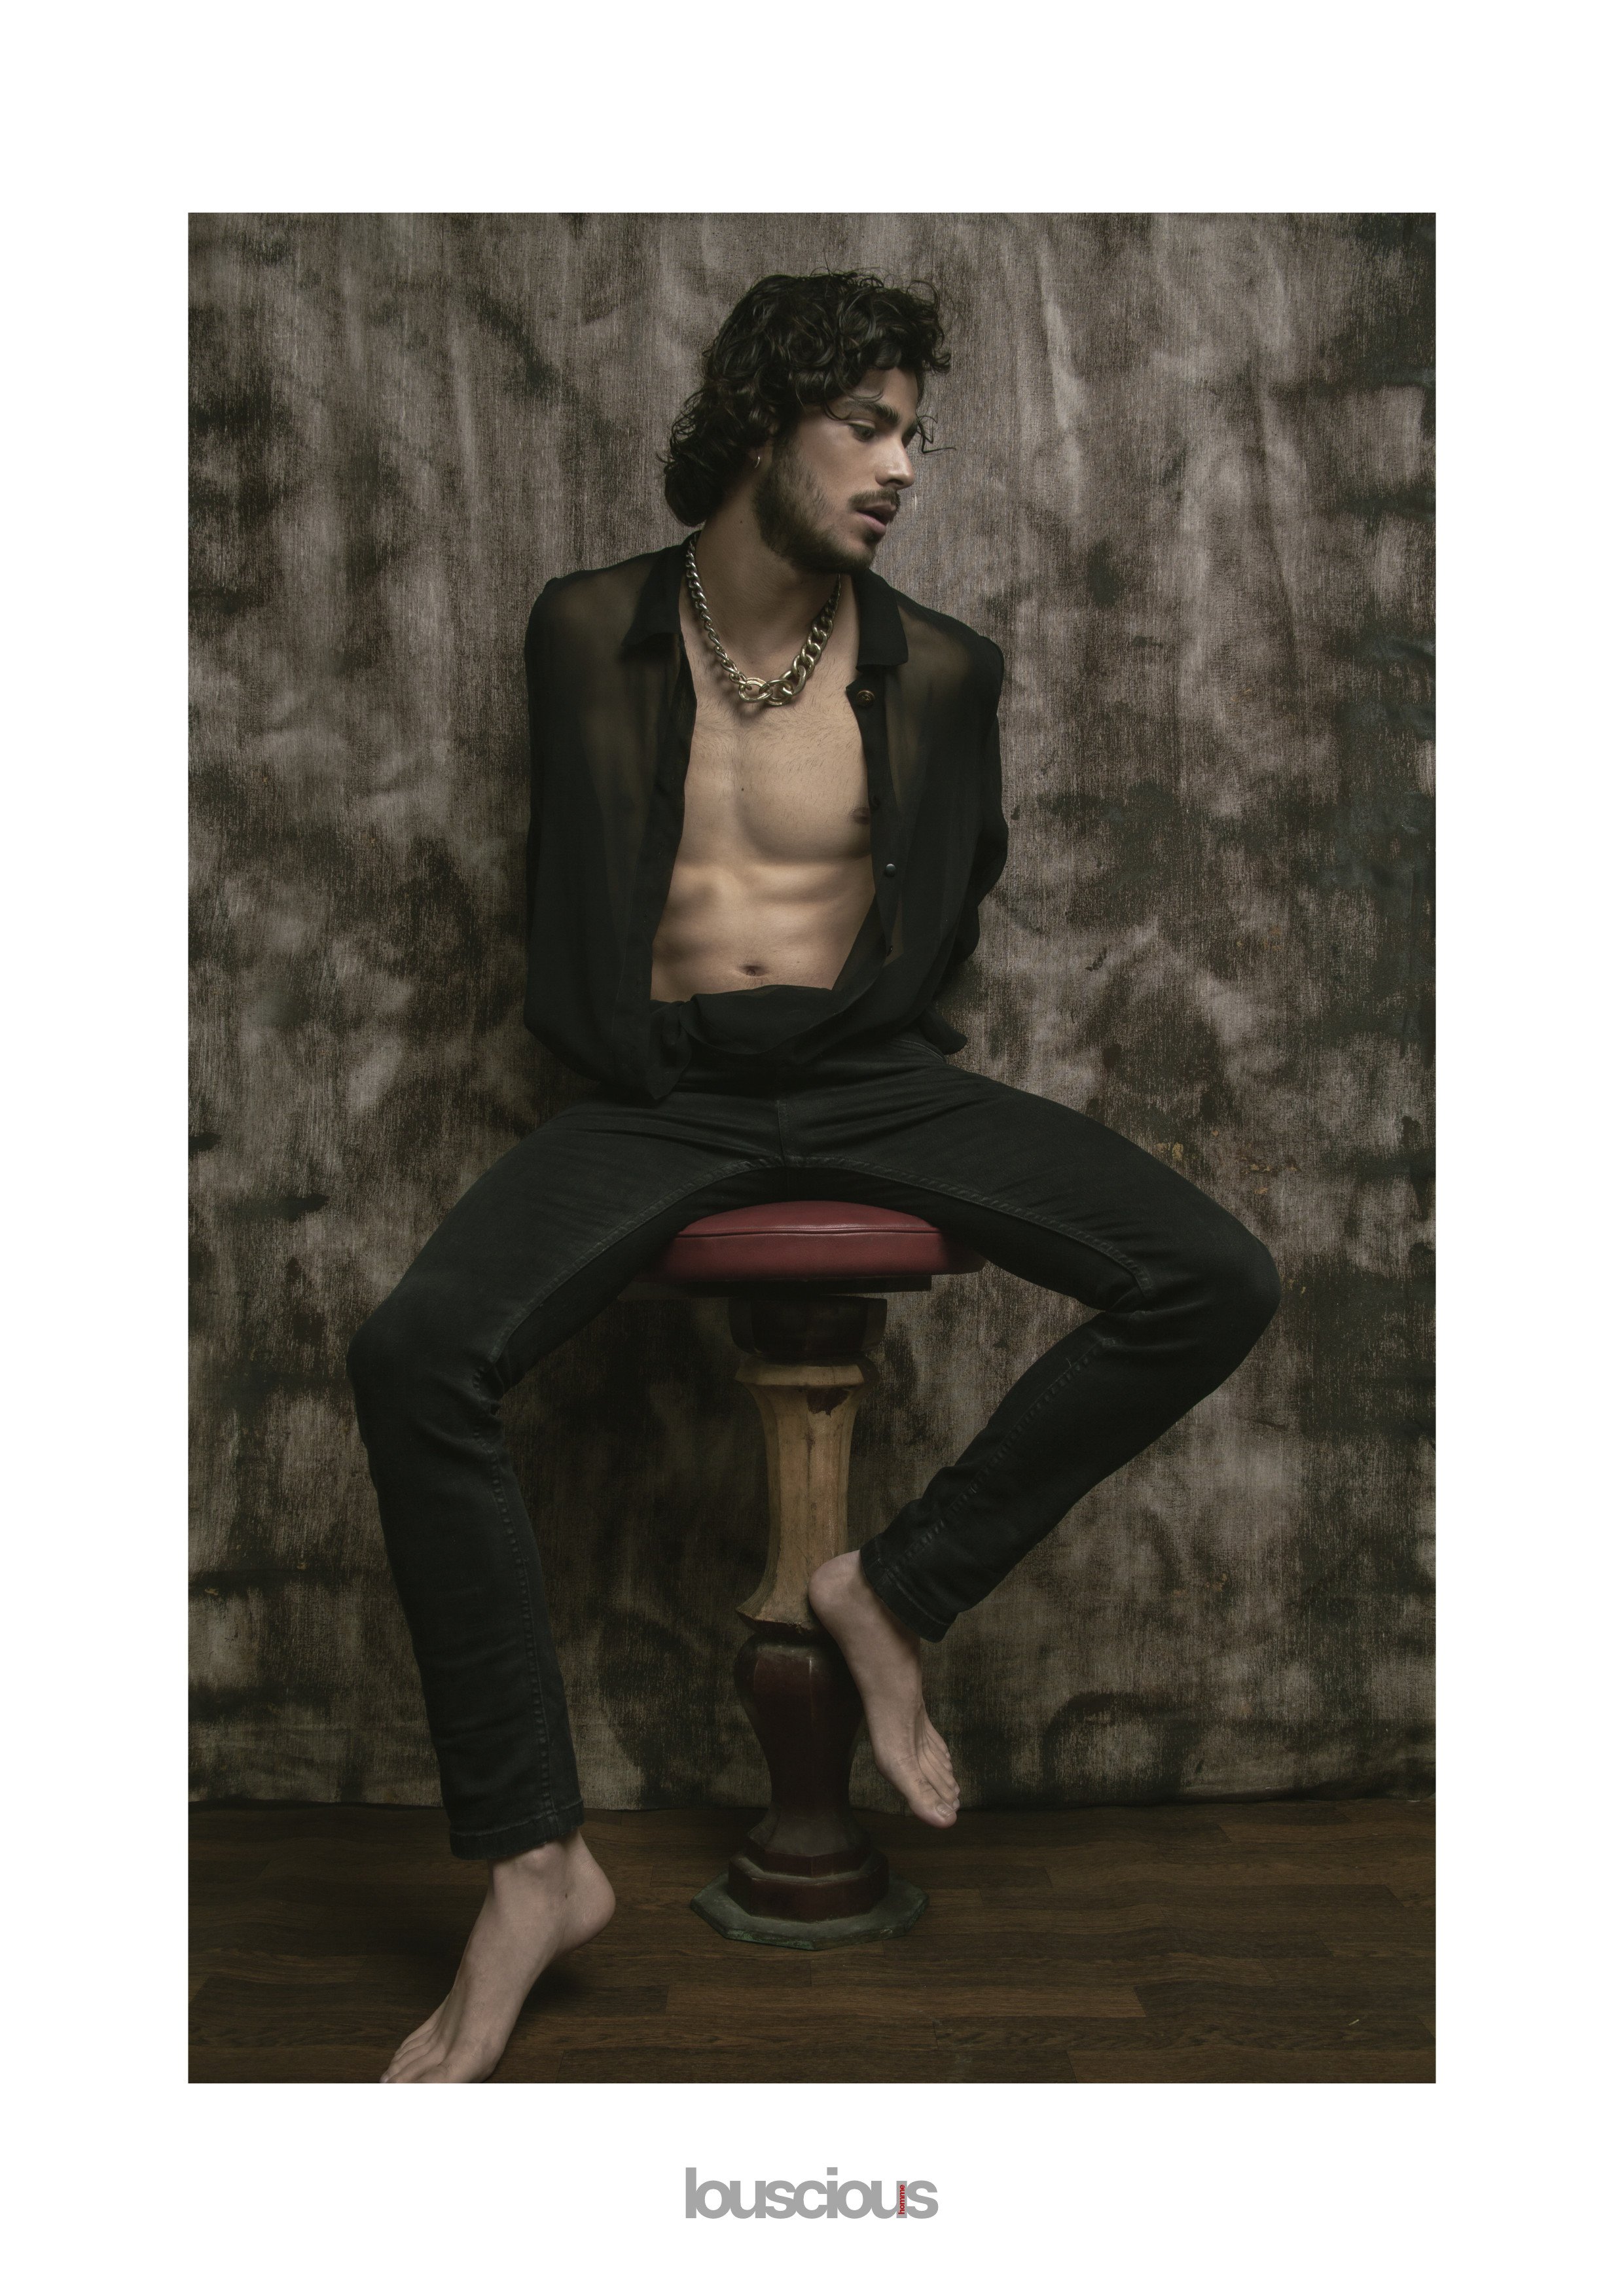 Louscious Homme Online Editorial - He´s the only one by Juan Carlos Canahuiri  _2.jpg